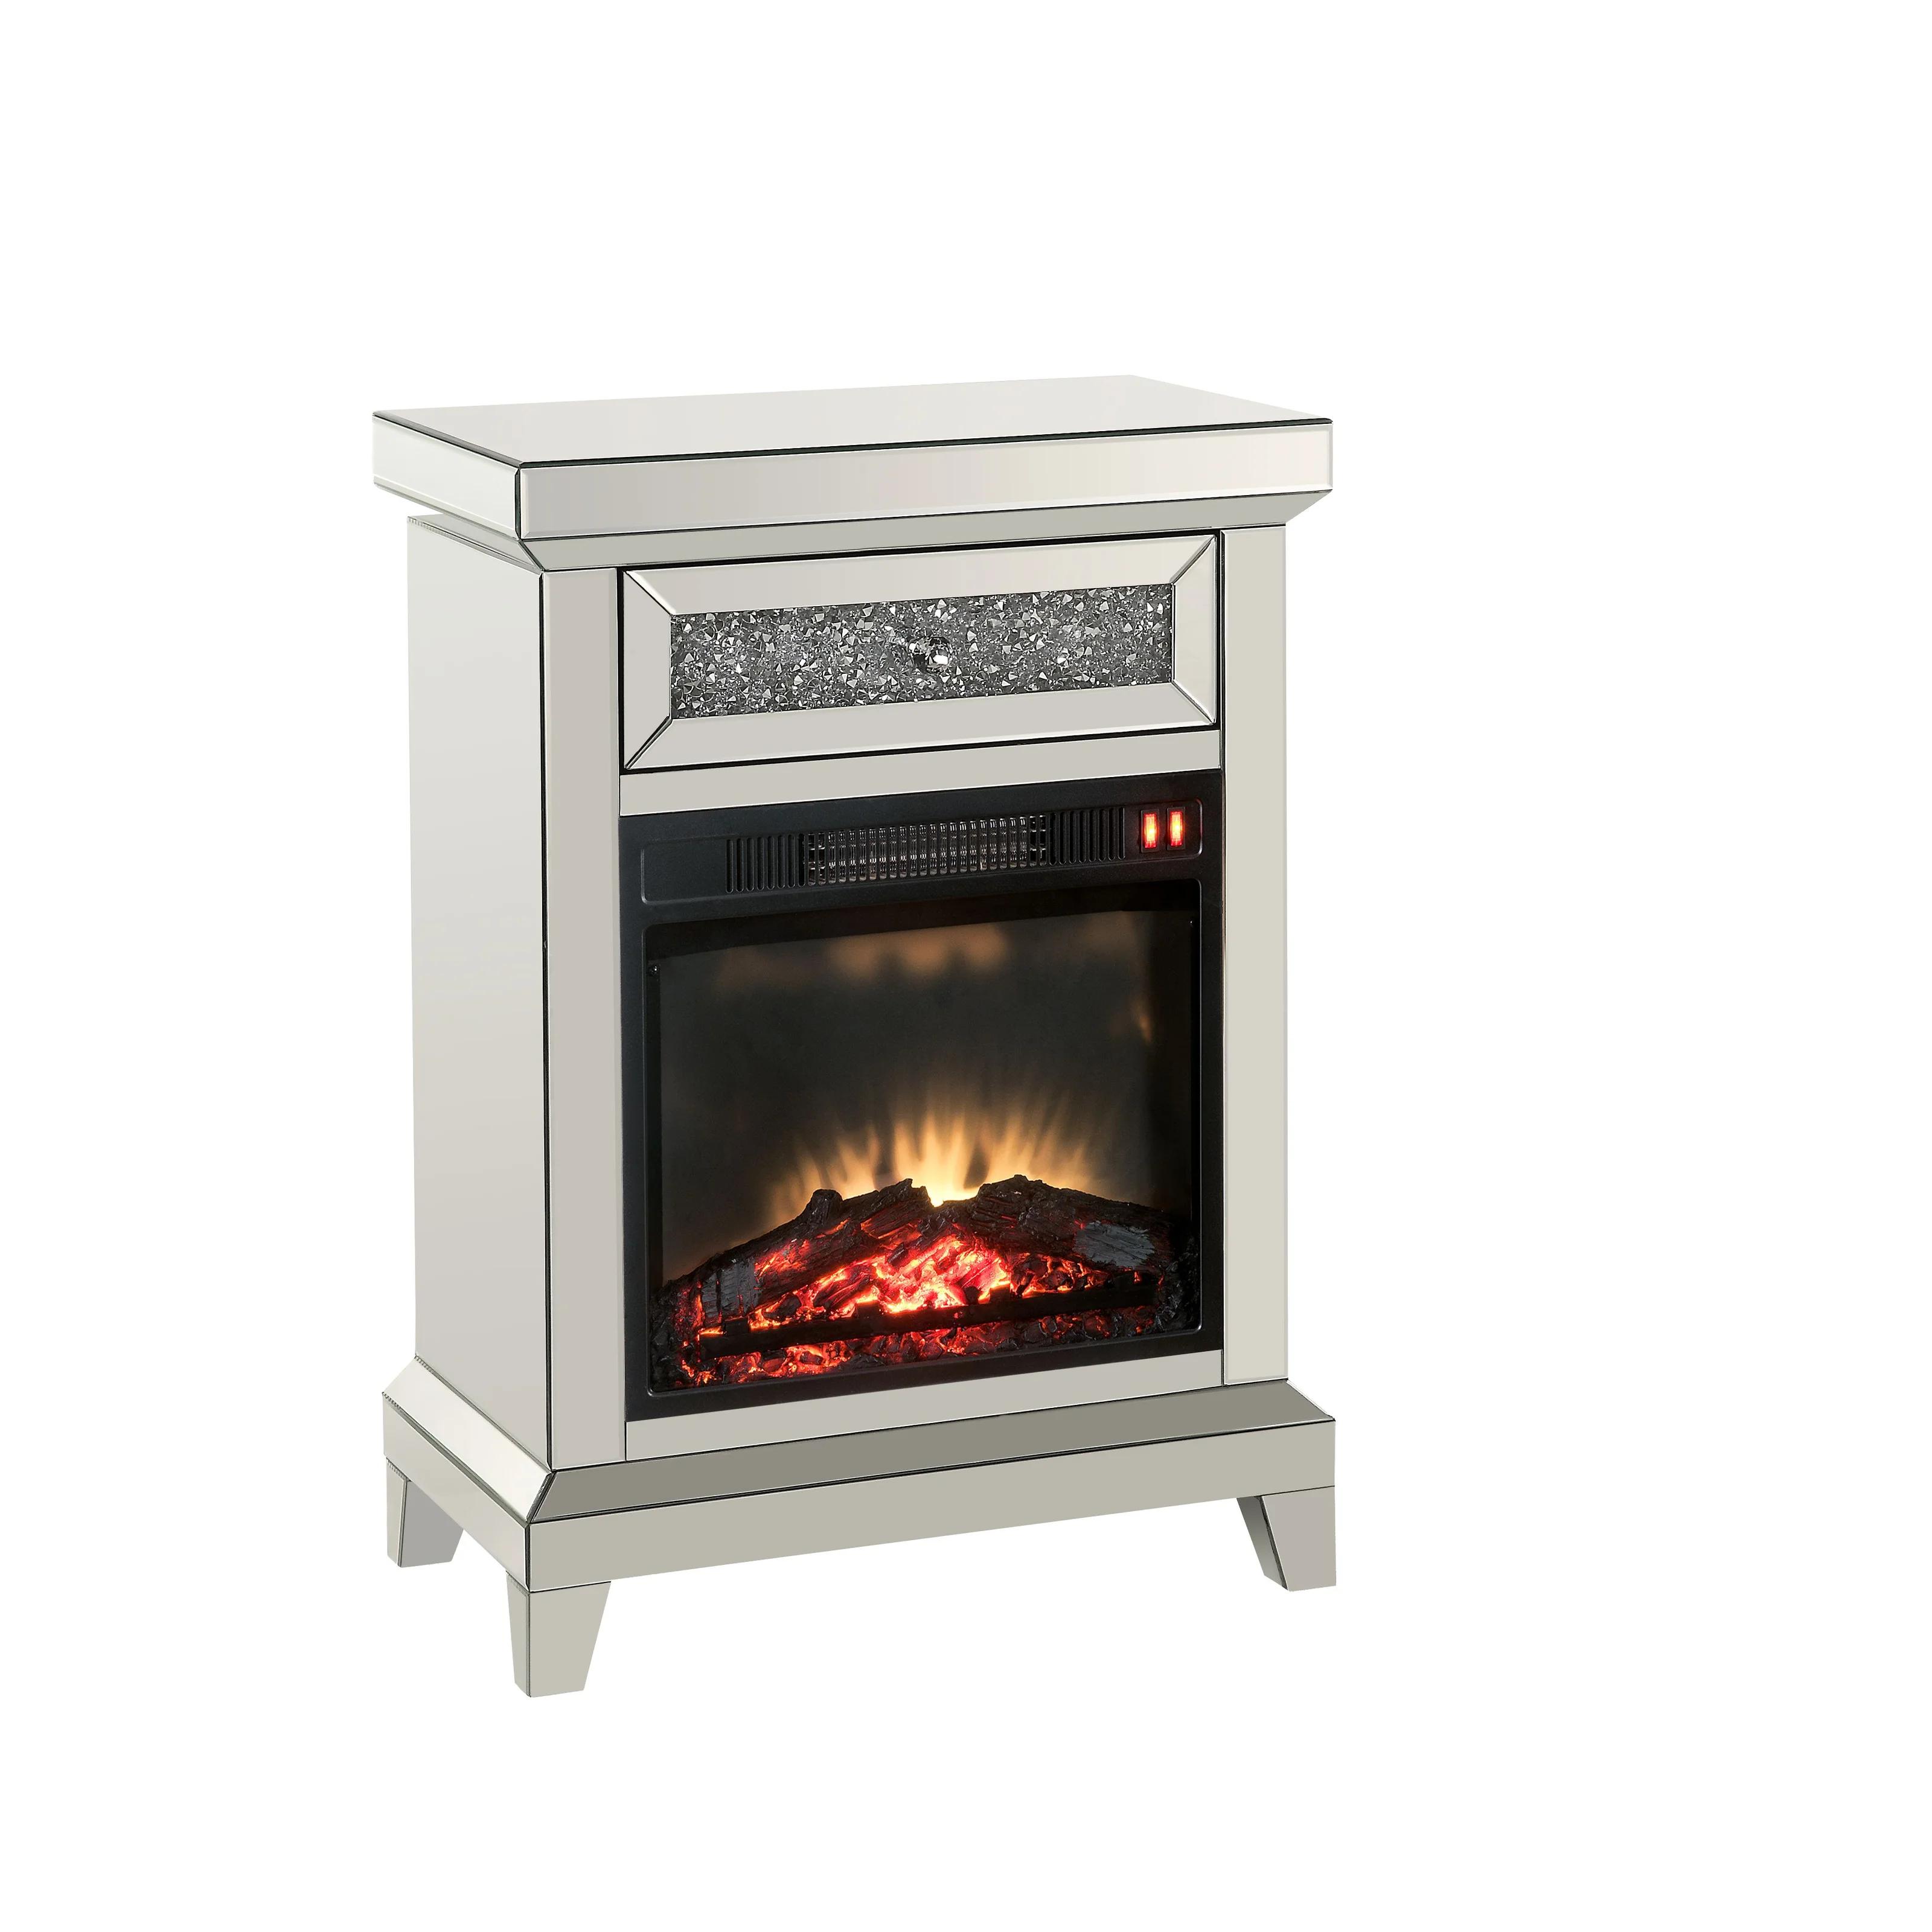 Modern Fireplace Noralie 90866 in Mirrored 